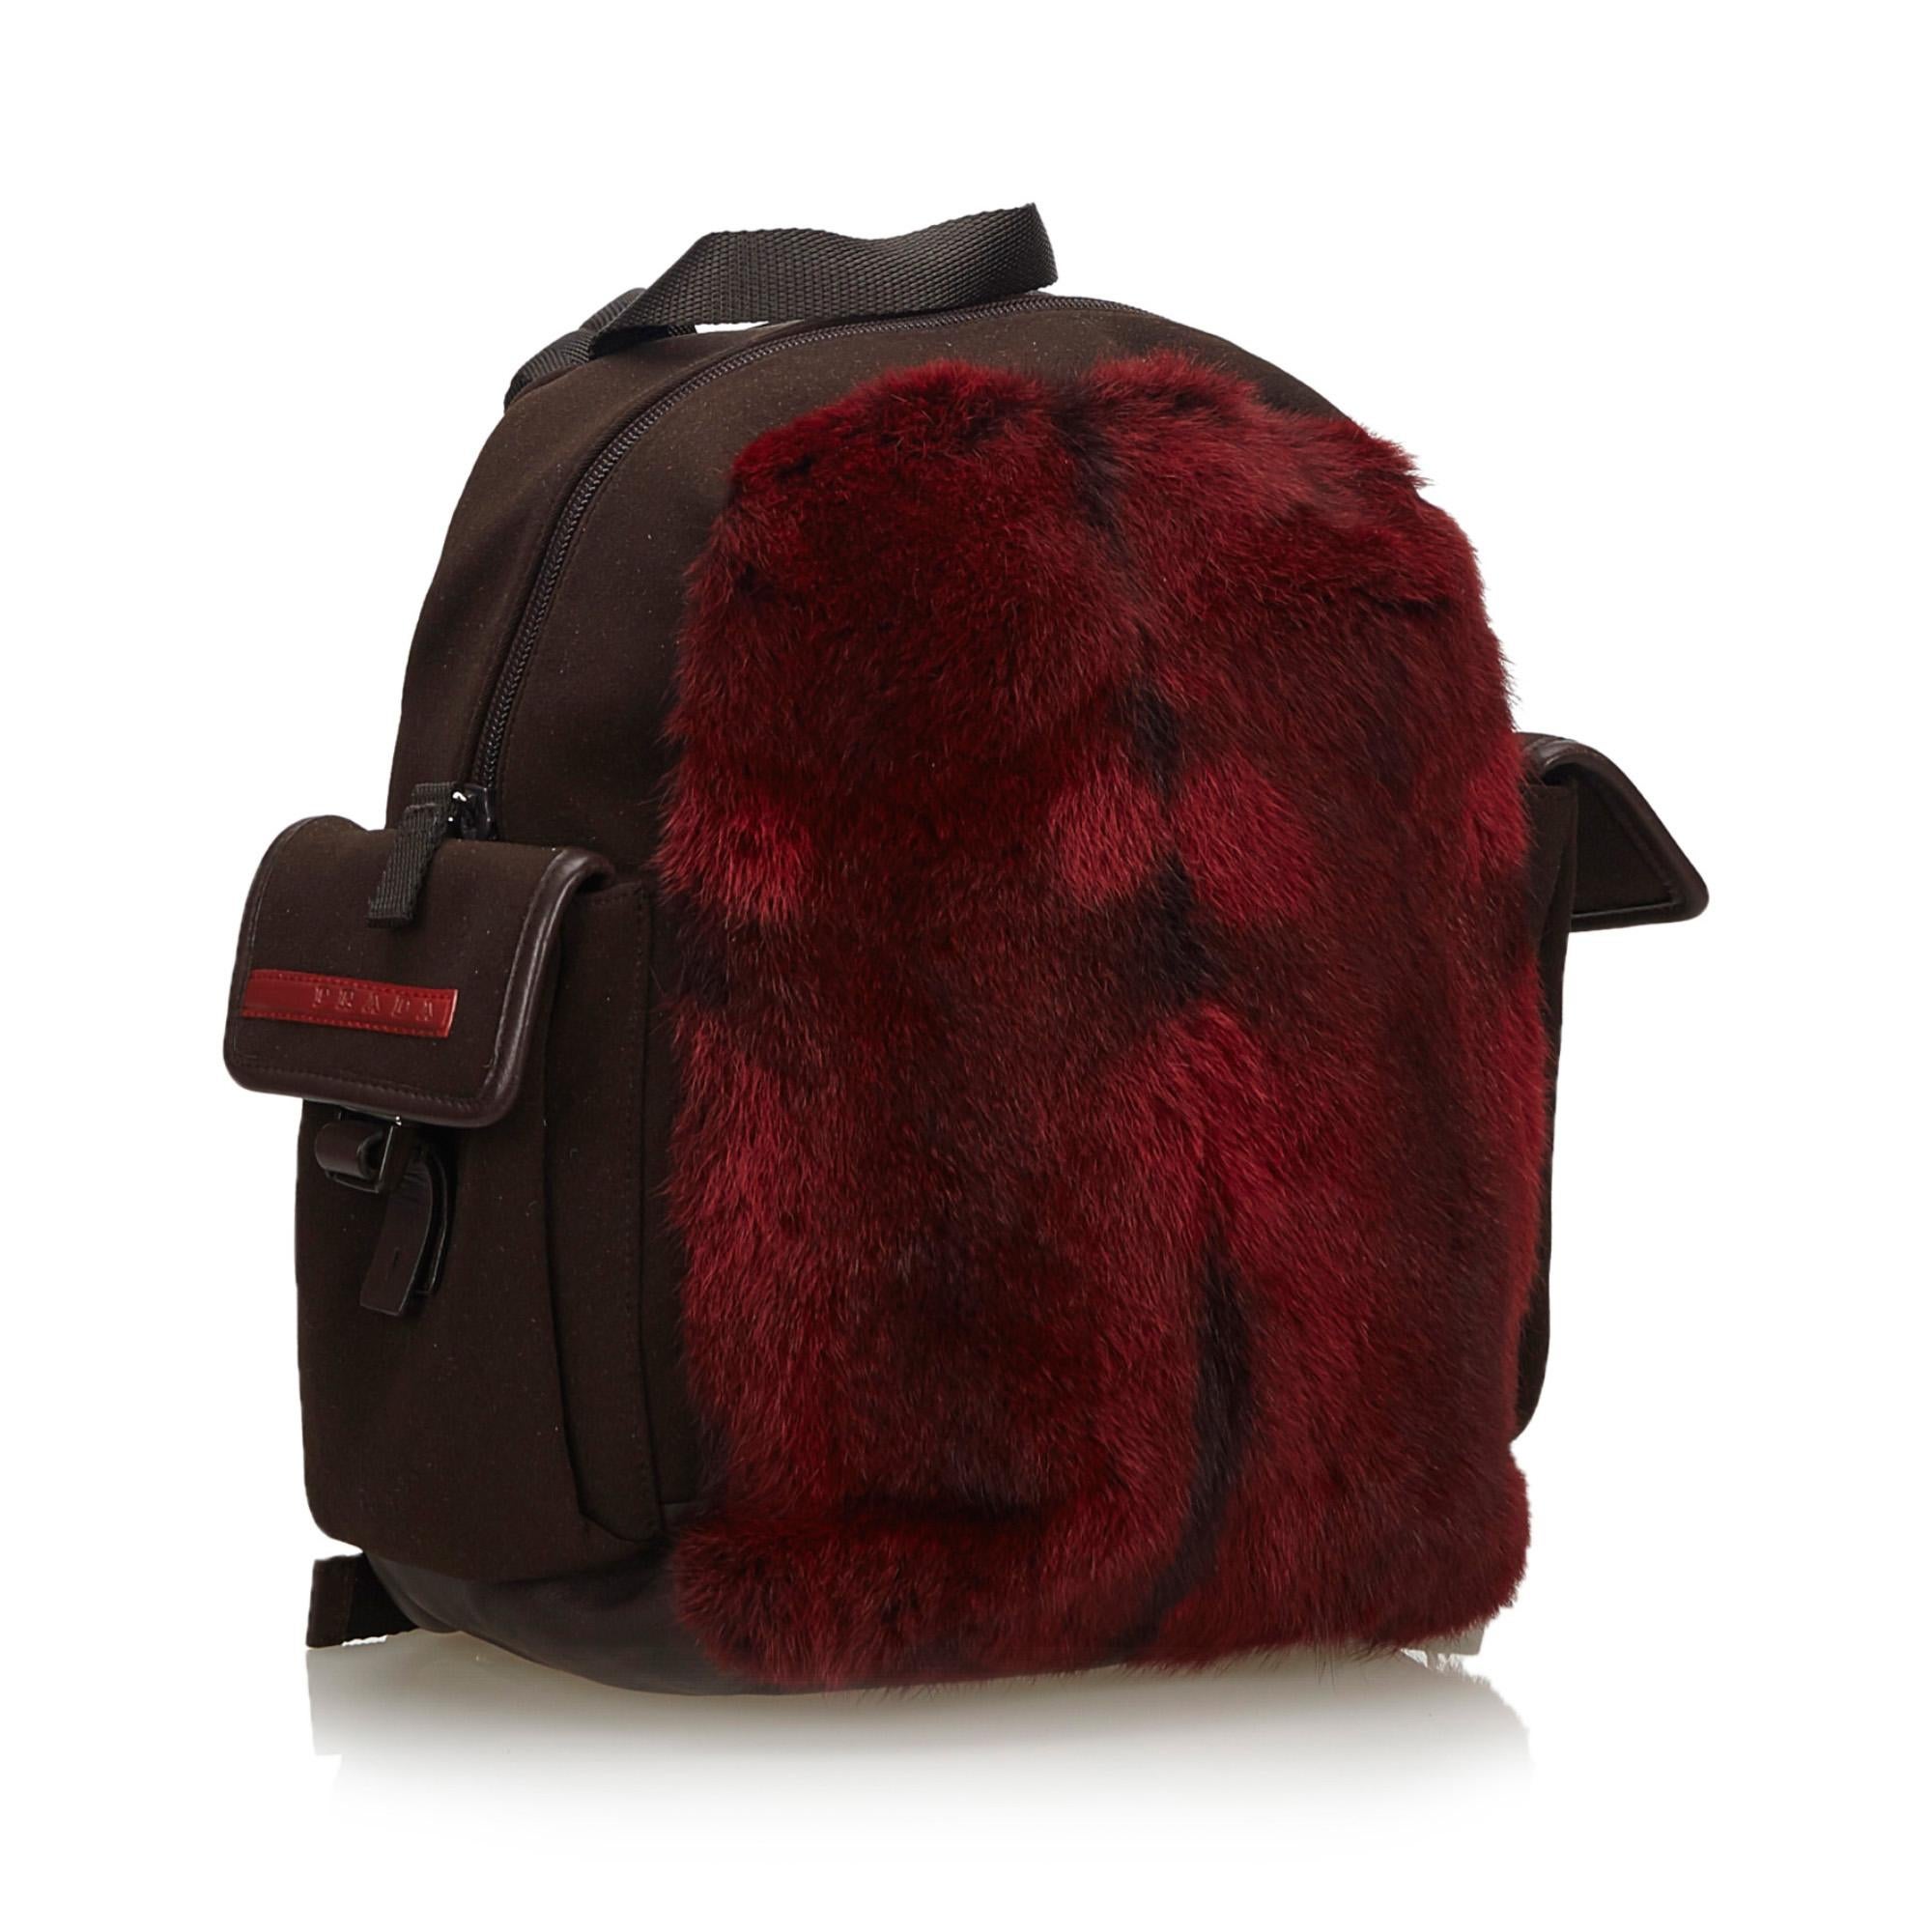 This backpack features a fur body, side exterior flap pockets, flat back straps, a flat top handle, a top zip closure, and an interior zip pocket. It carries as AB condition rating.

Inclusions: 
This item does not come with